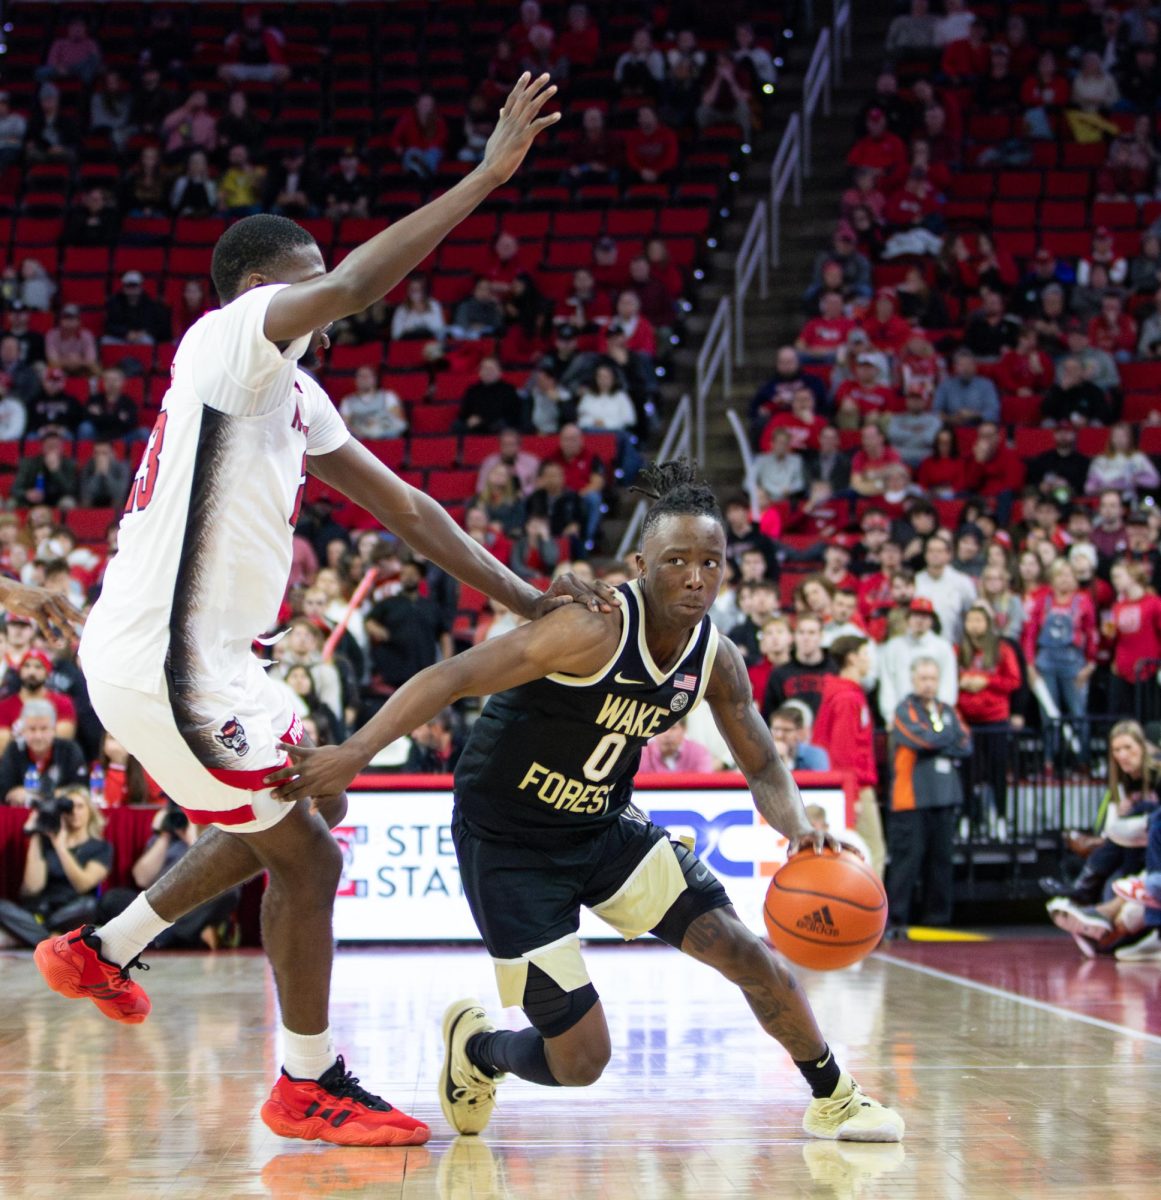 Kevin “Boopie” Miller (0) dribbles past NC State.